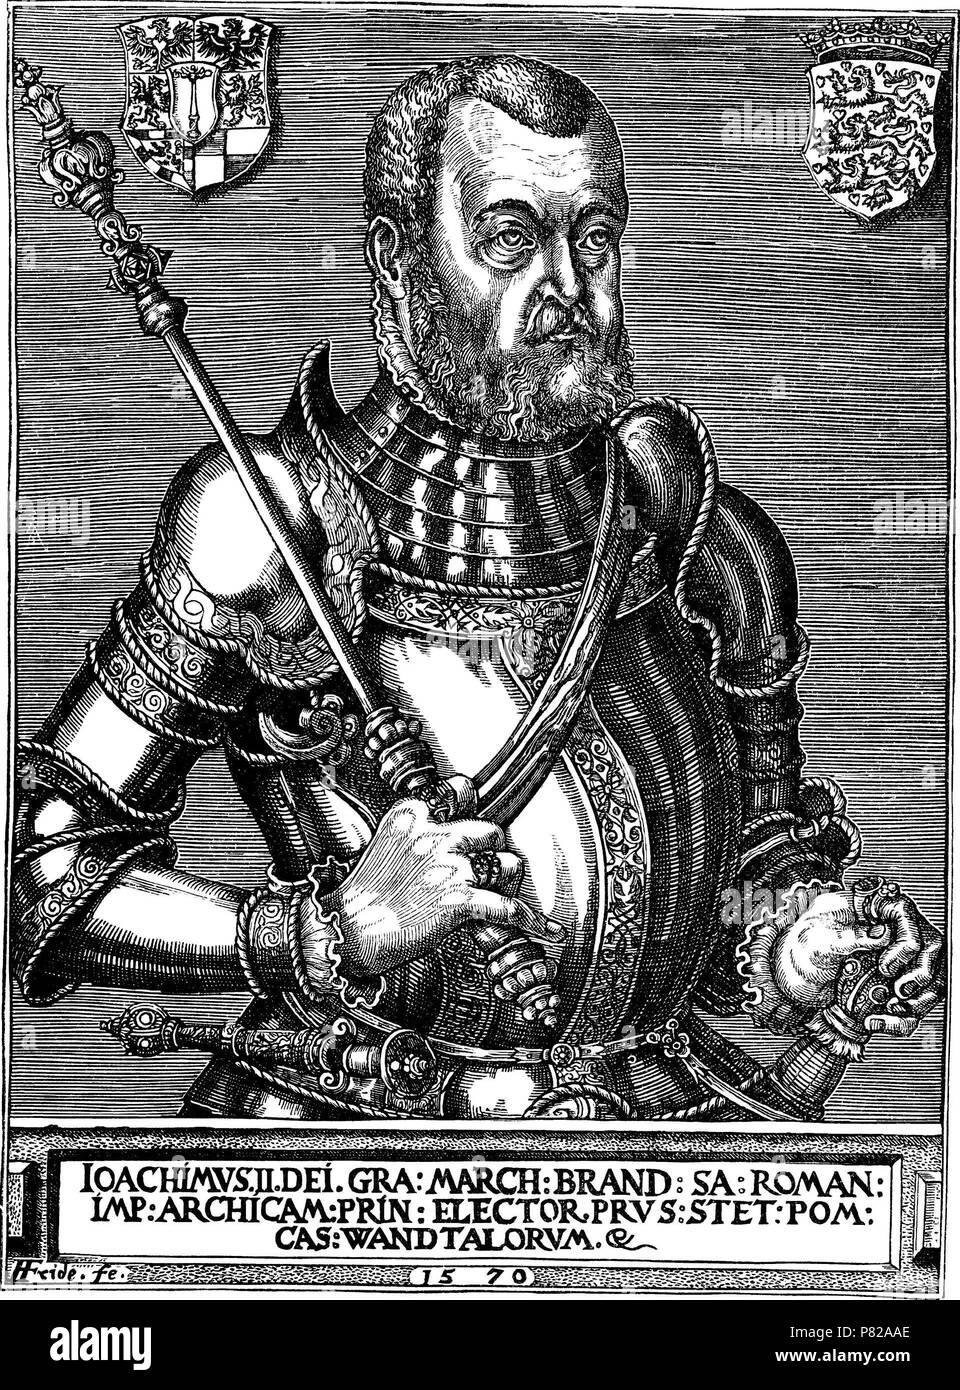 Portrait of Joachim II Hector (1505-1571), Elector of Brandenburg. Museum: PRIVATE COLLECTION. Stock Photo